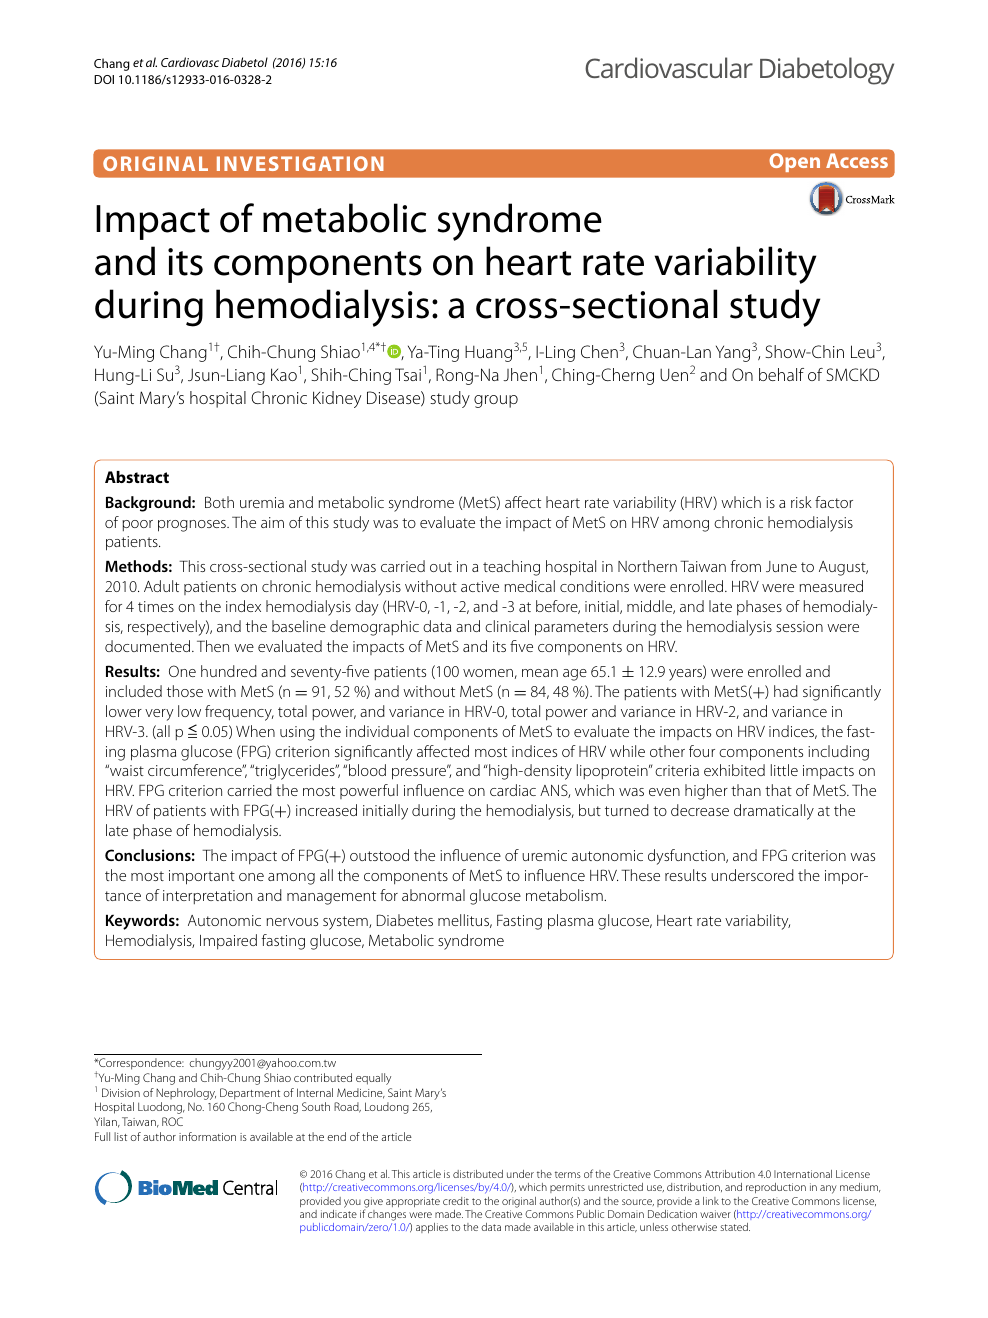 Impact Of Metabolic Syndrome And Its Components On Heart Rate Variability During Hemodialysis A Cross Sectional Study Topic Of Research Paper In Clinical Medicine Download Scholarly Article Pdf And Read For Free